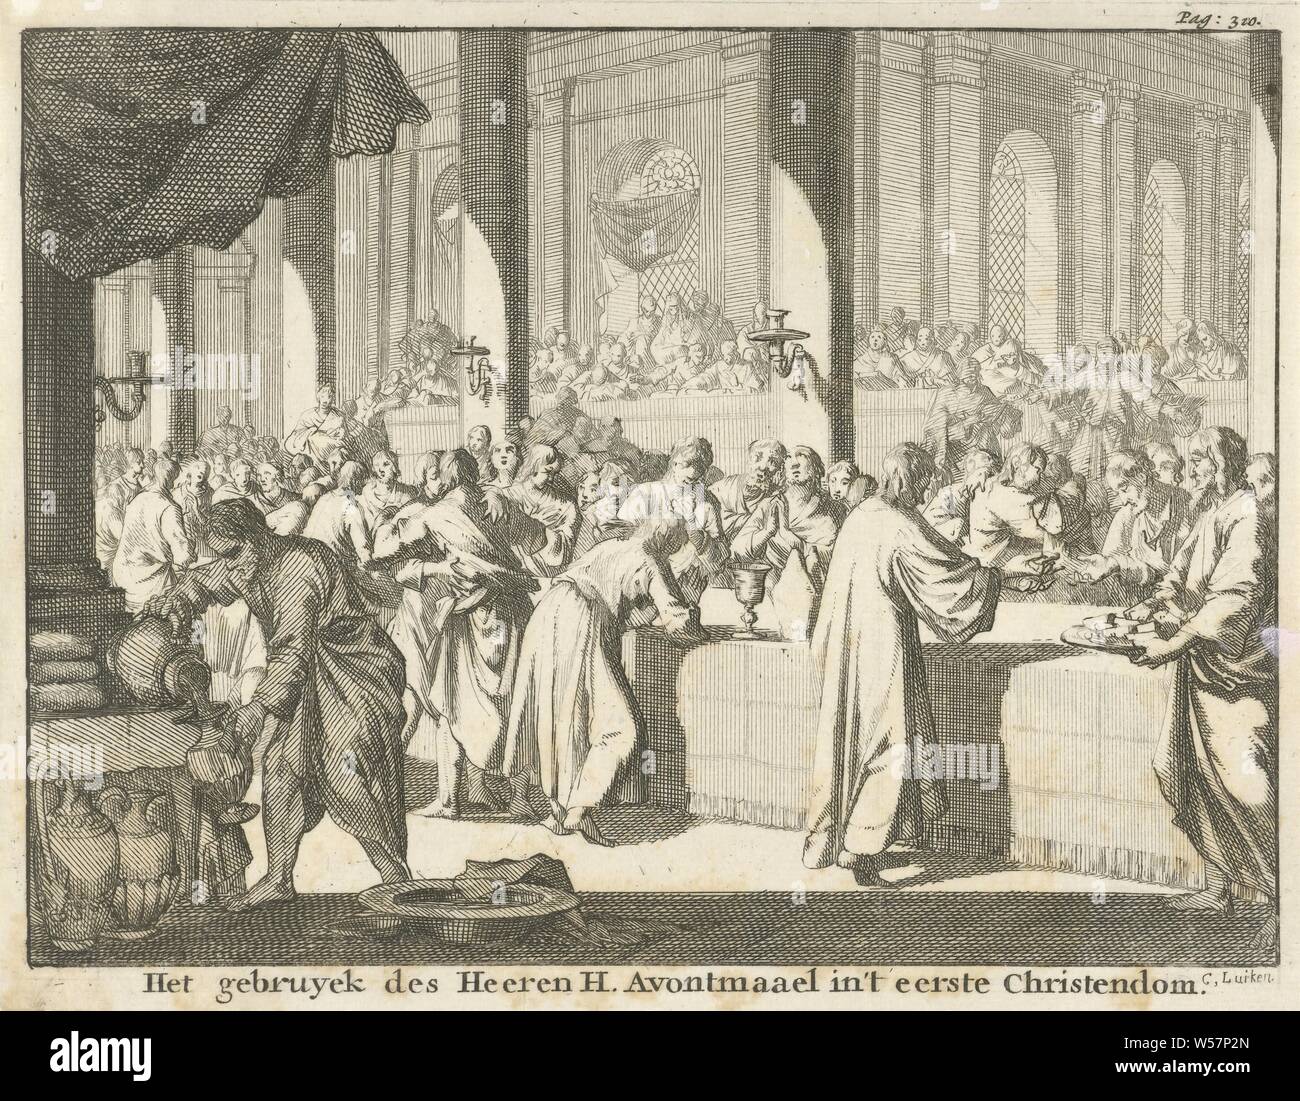 Eucharistic celebration in a church The use of the Lord H. Avontmaael in the first Christianity (title on object), Print upper right: Pag: 310, Holy Communion, Protestant service, Caspar Luyken (mentioned on object), Amsterdam, 1694, paper, etching, h 135 mm × w 173 mm Stock Photo